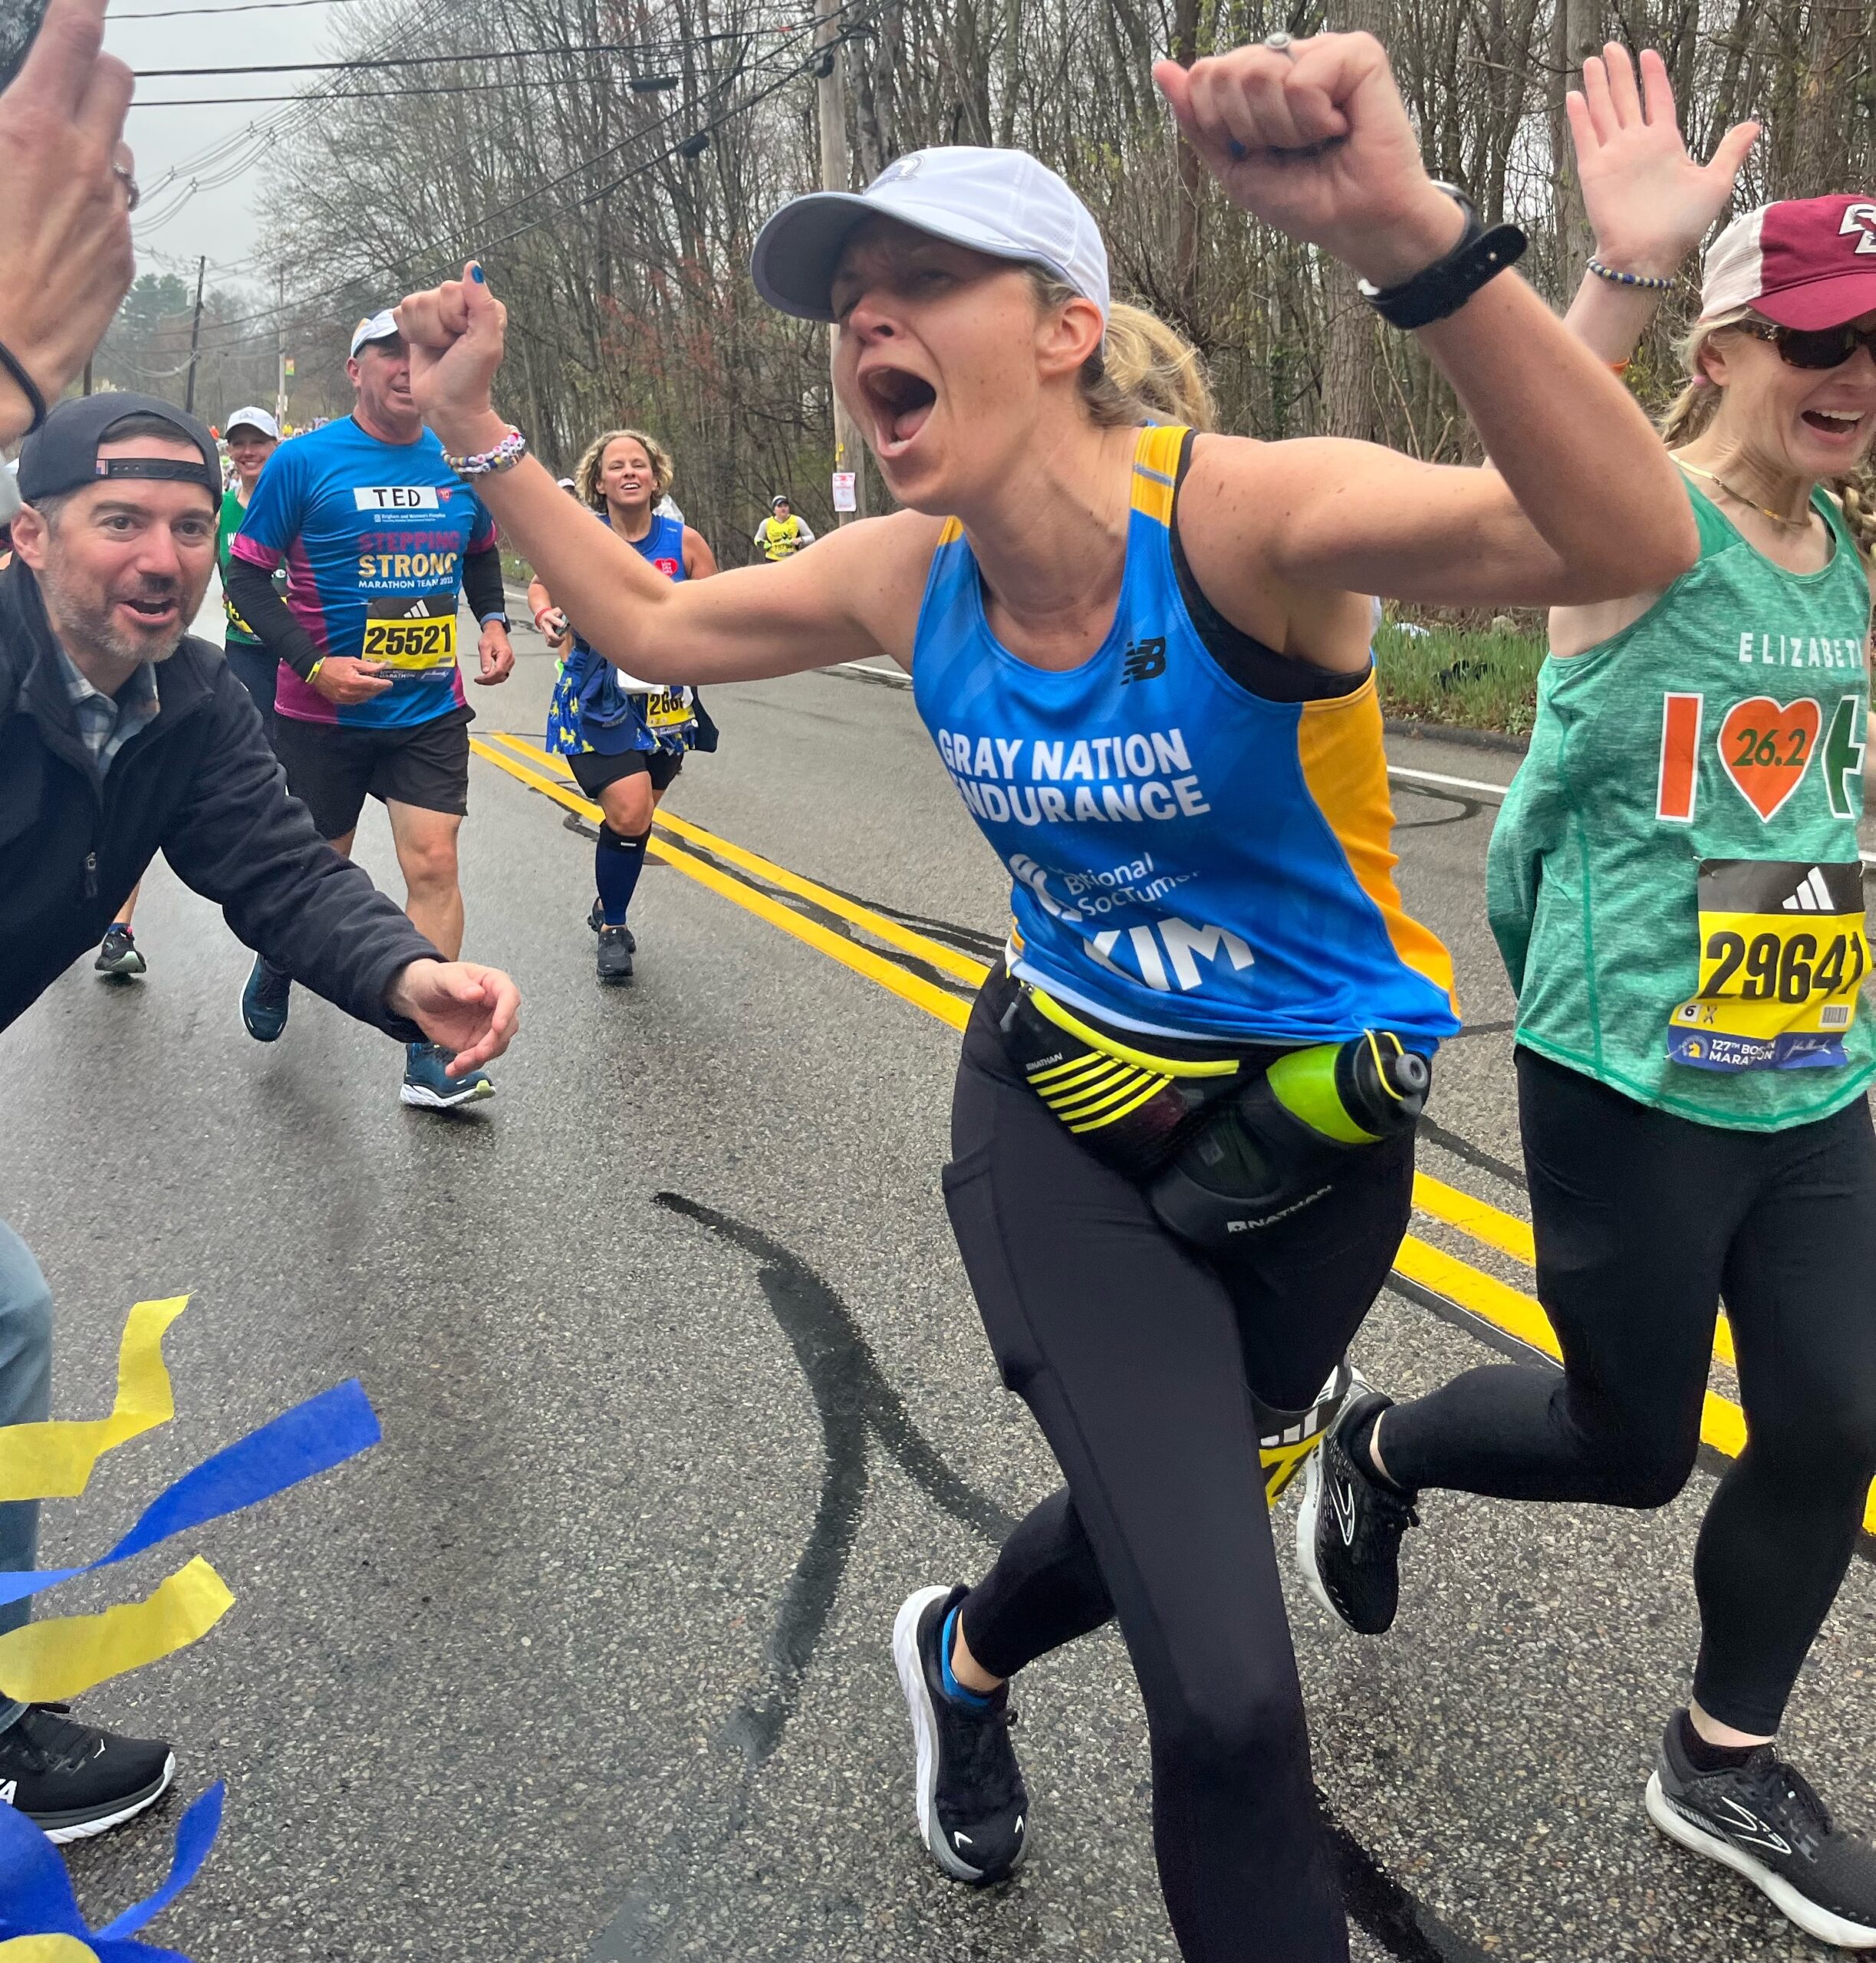 Local Boston Marathon runners revel in crowd support in Hopkinton, along course